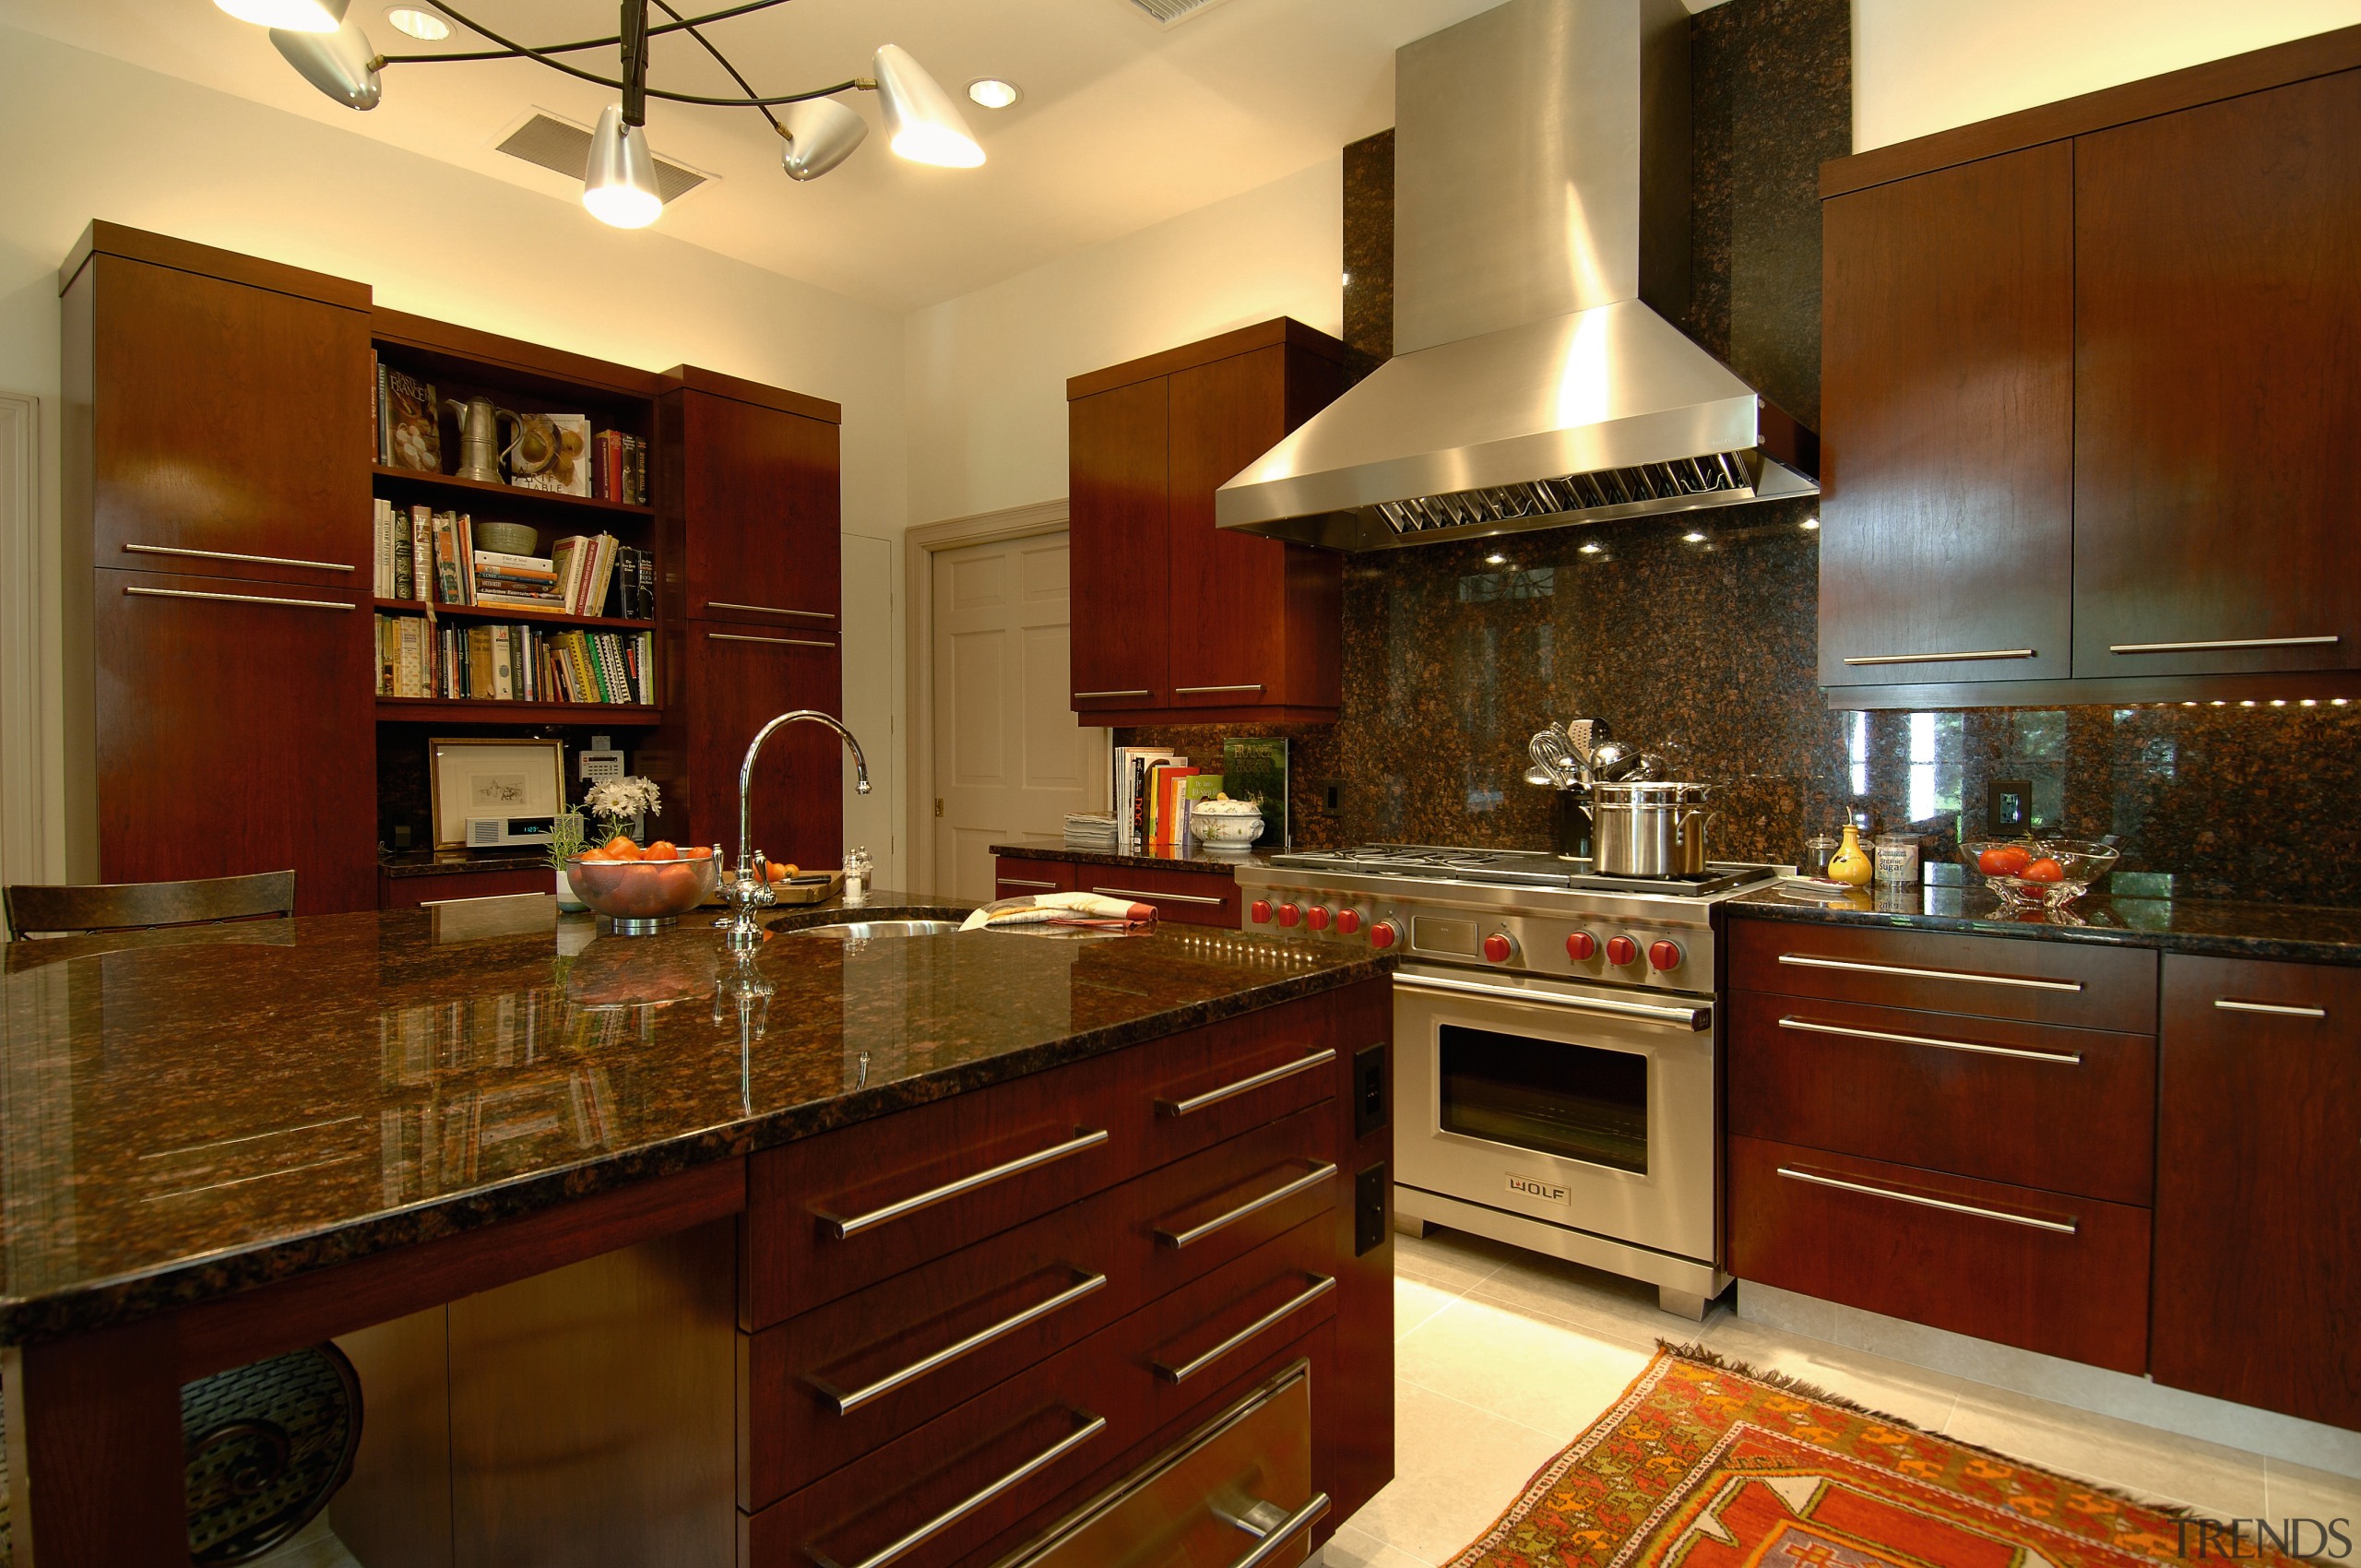 A view of some kitchen cabinetry by Best cabinetry, countertop, cuisine classique, interior design, kitchen, room, brown, red